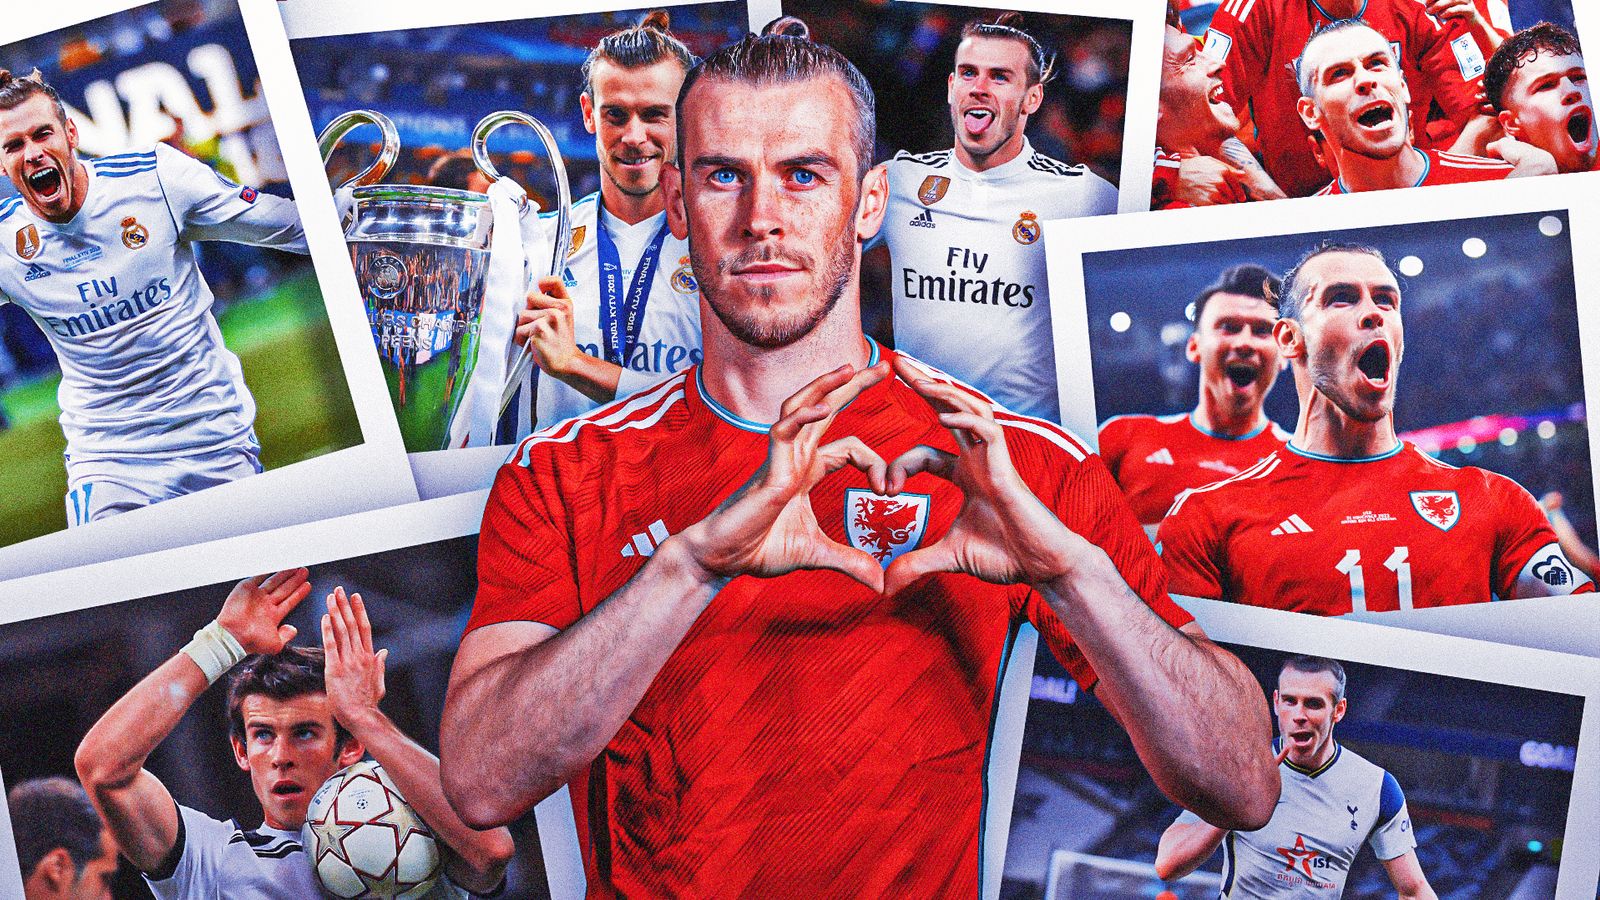 Football players' salaries revealed: Bale sneaks onto the podium